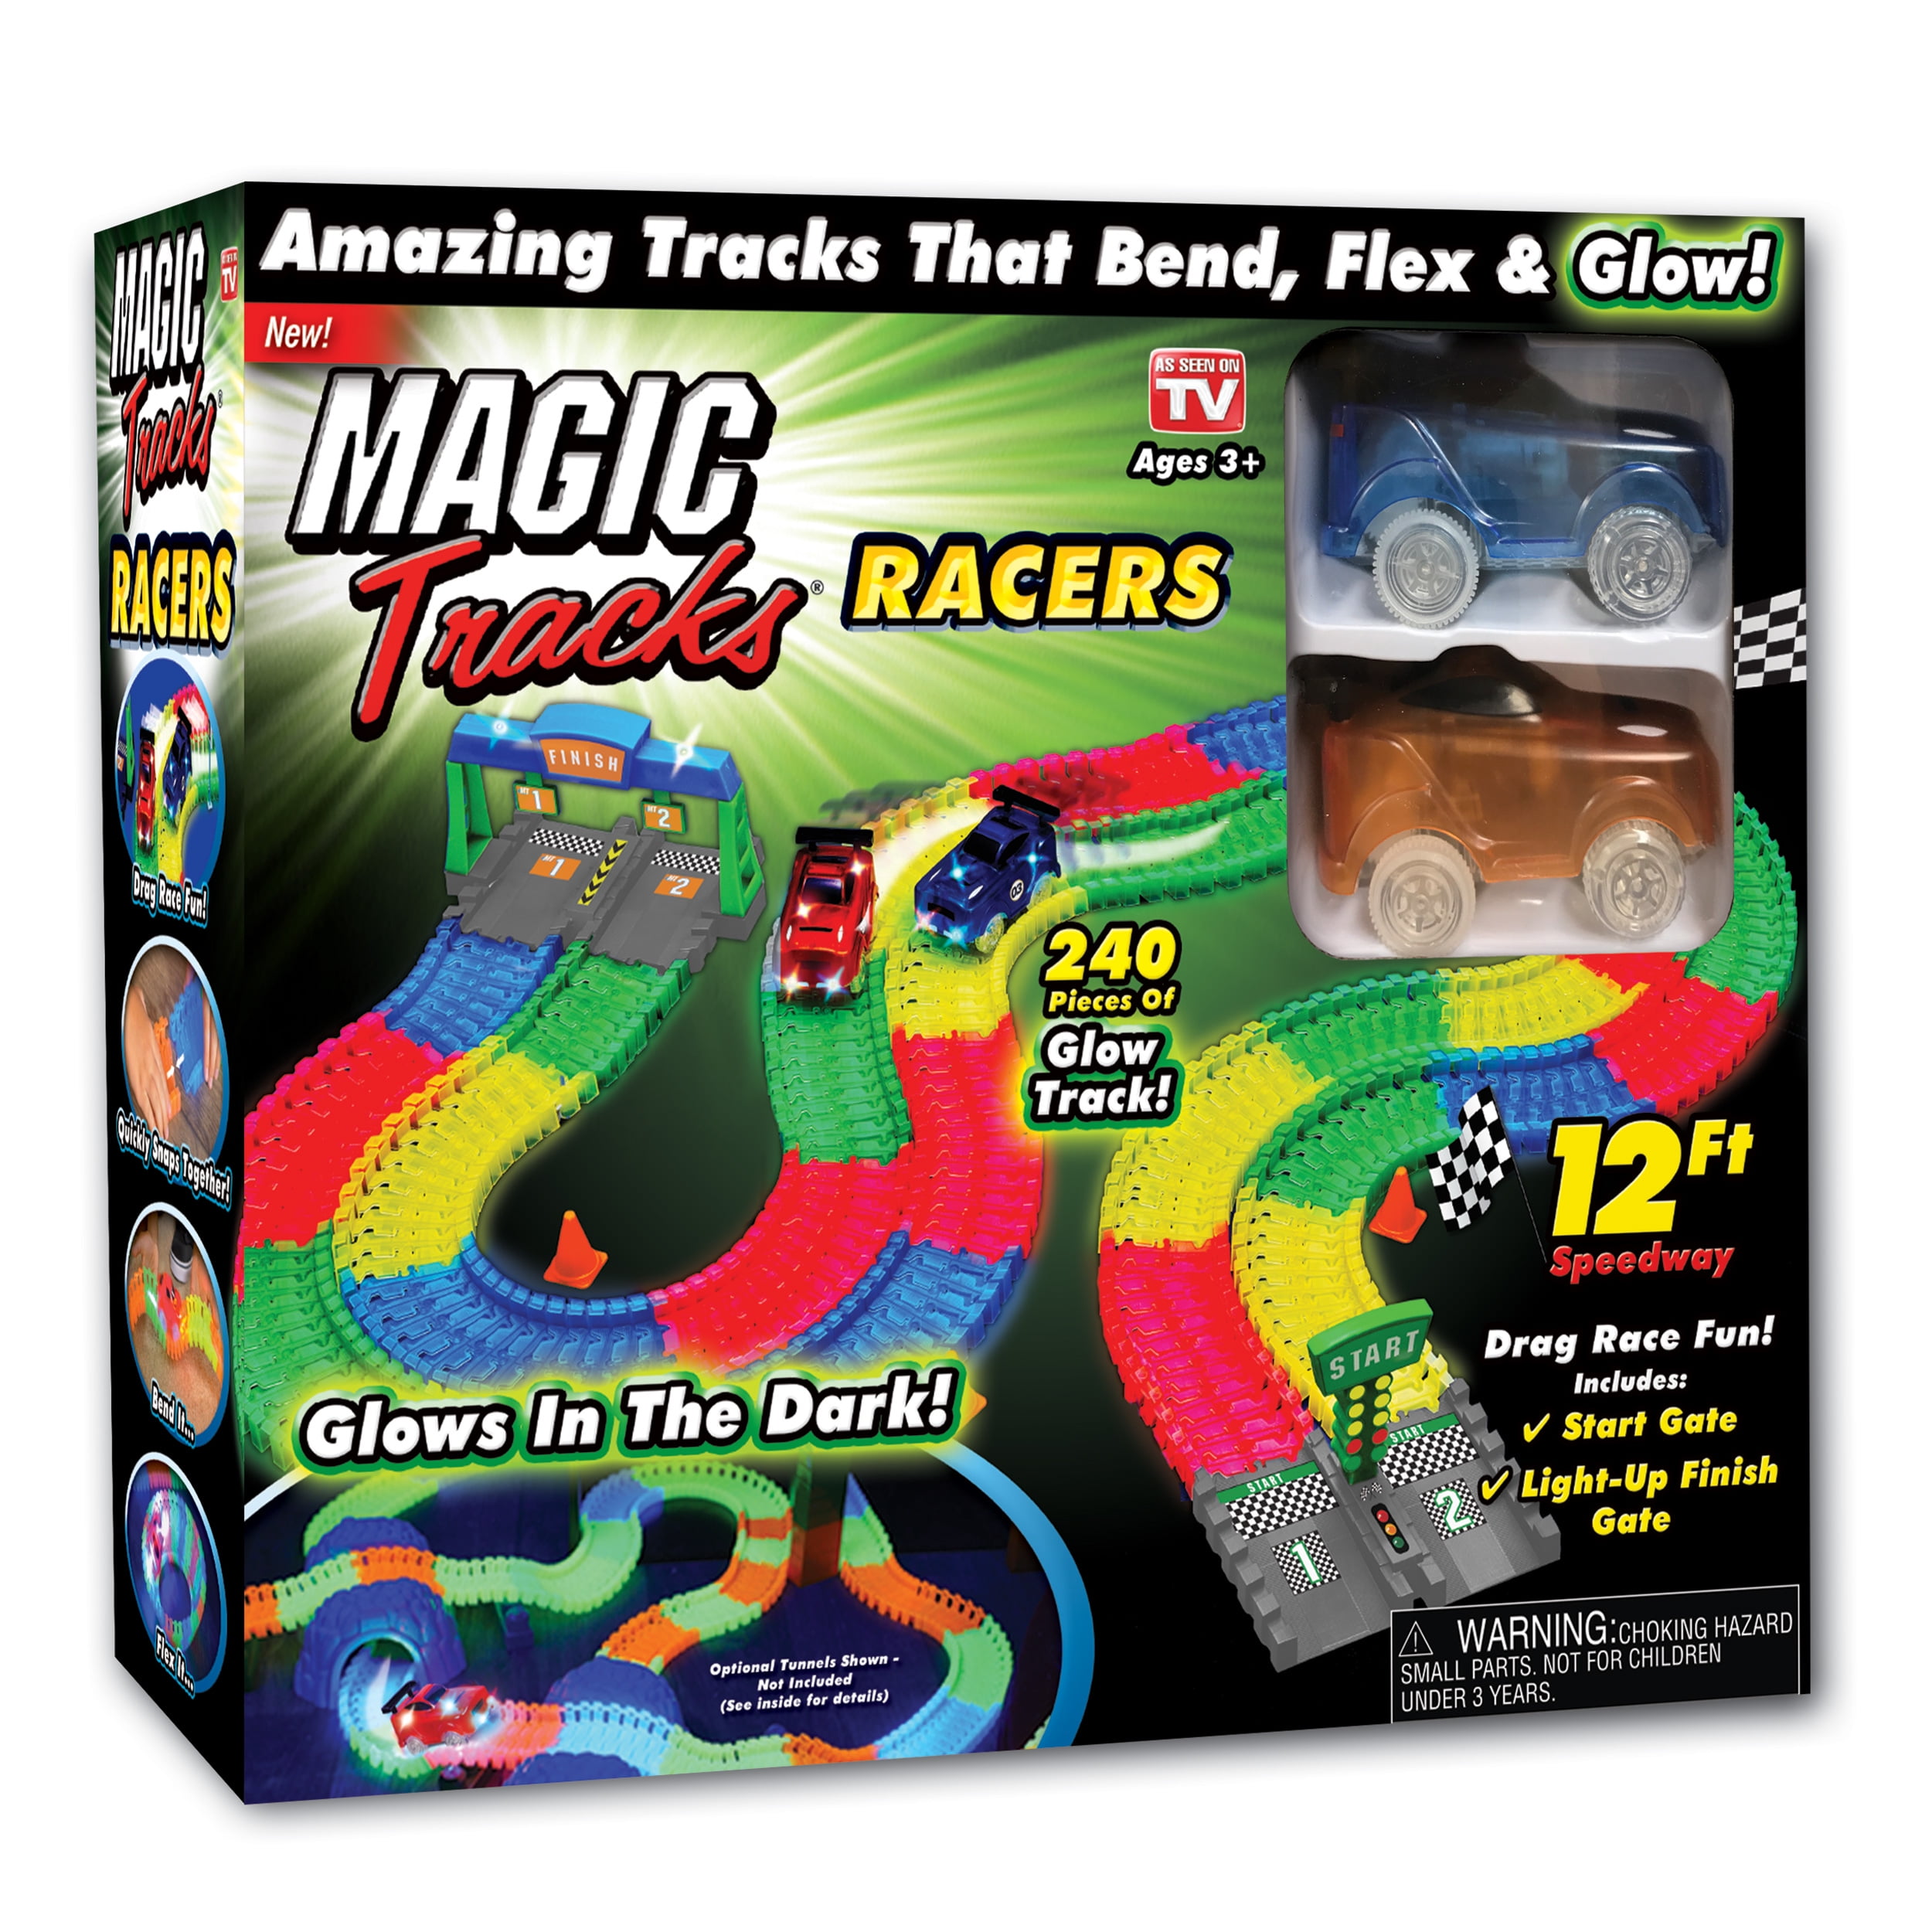 Accessories for Glowing Race Tracks, Magic Tracks